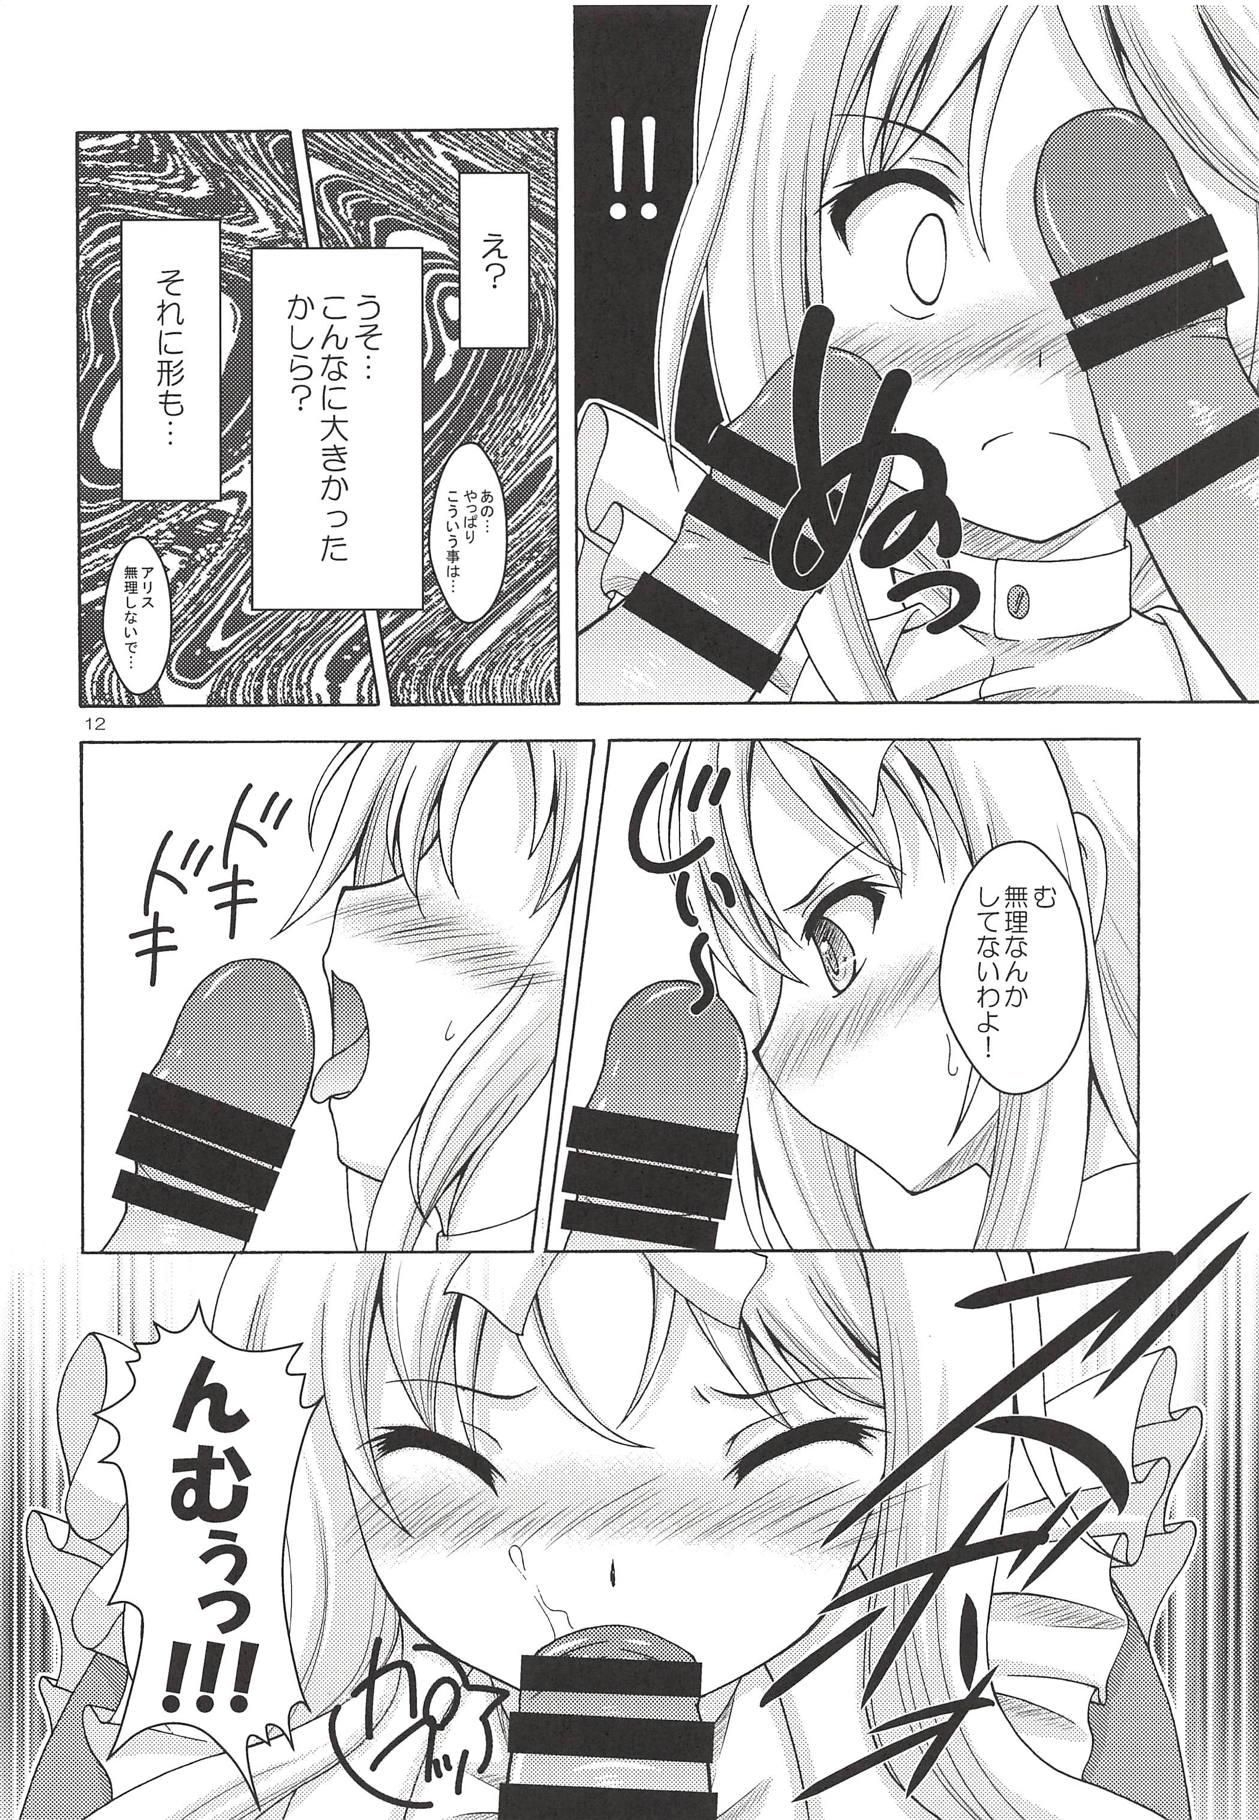 Spy Camera Alice no Yume - Sword art online Pussy To Mouth - Page 11